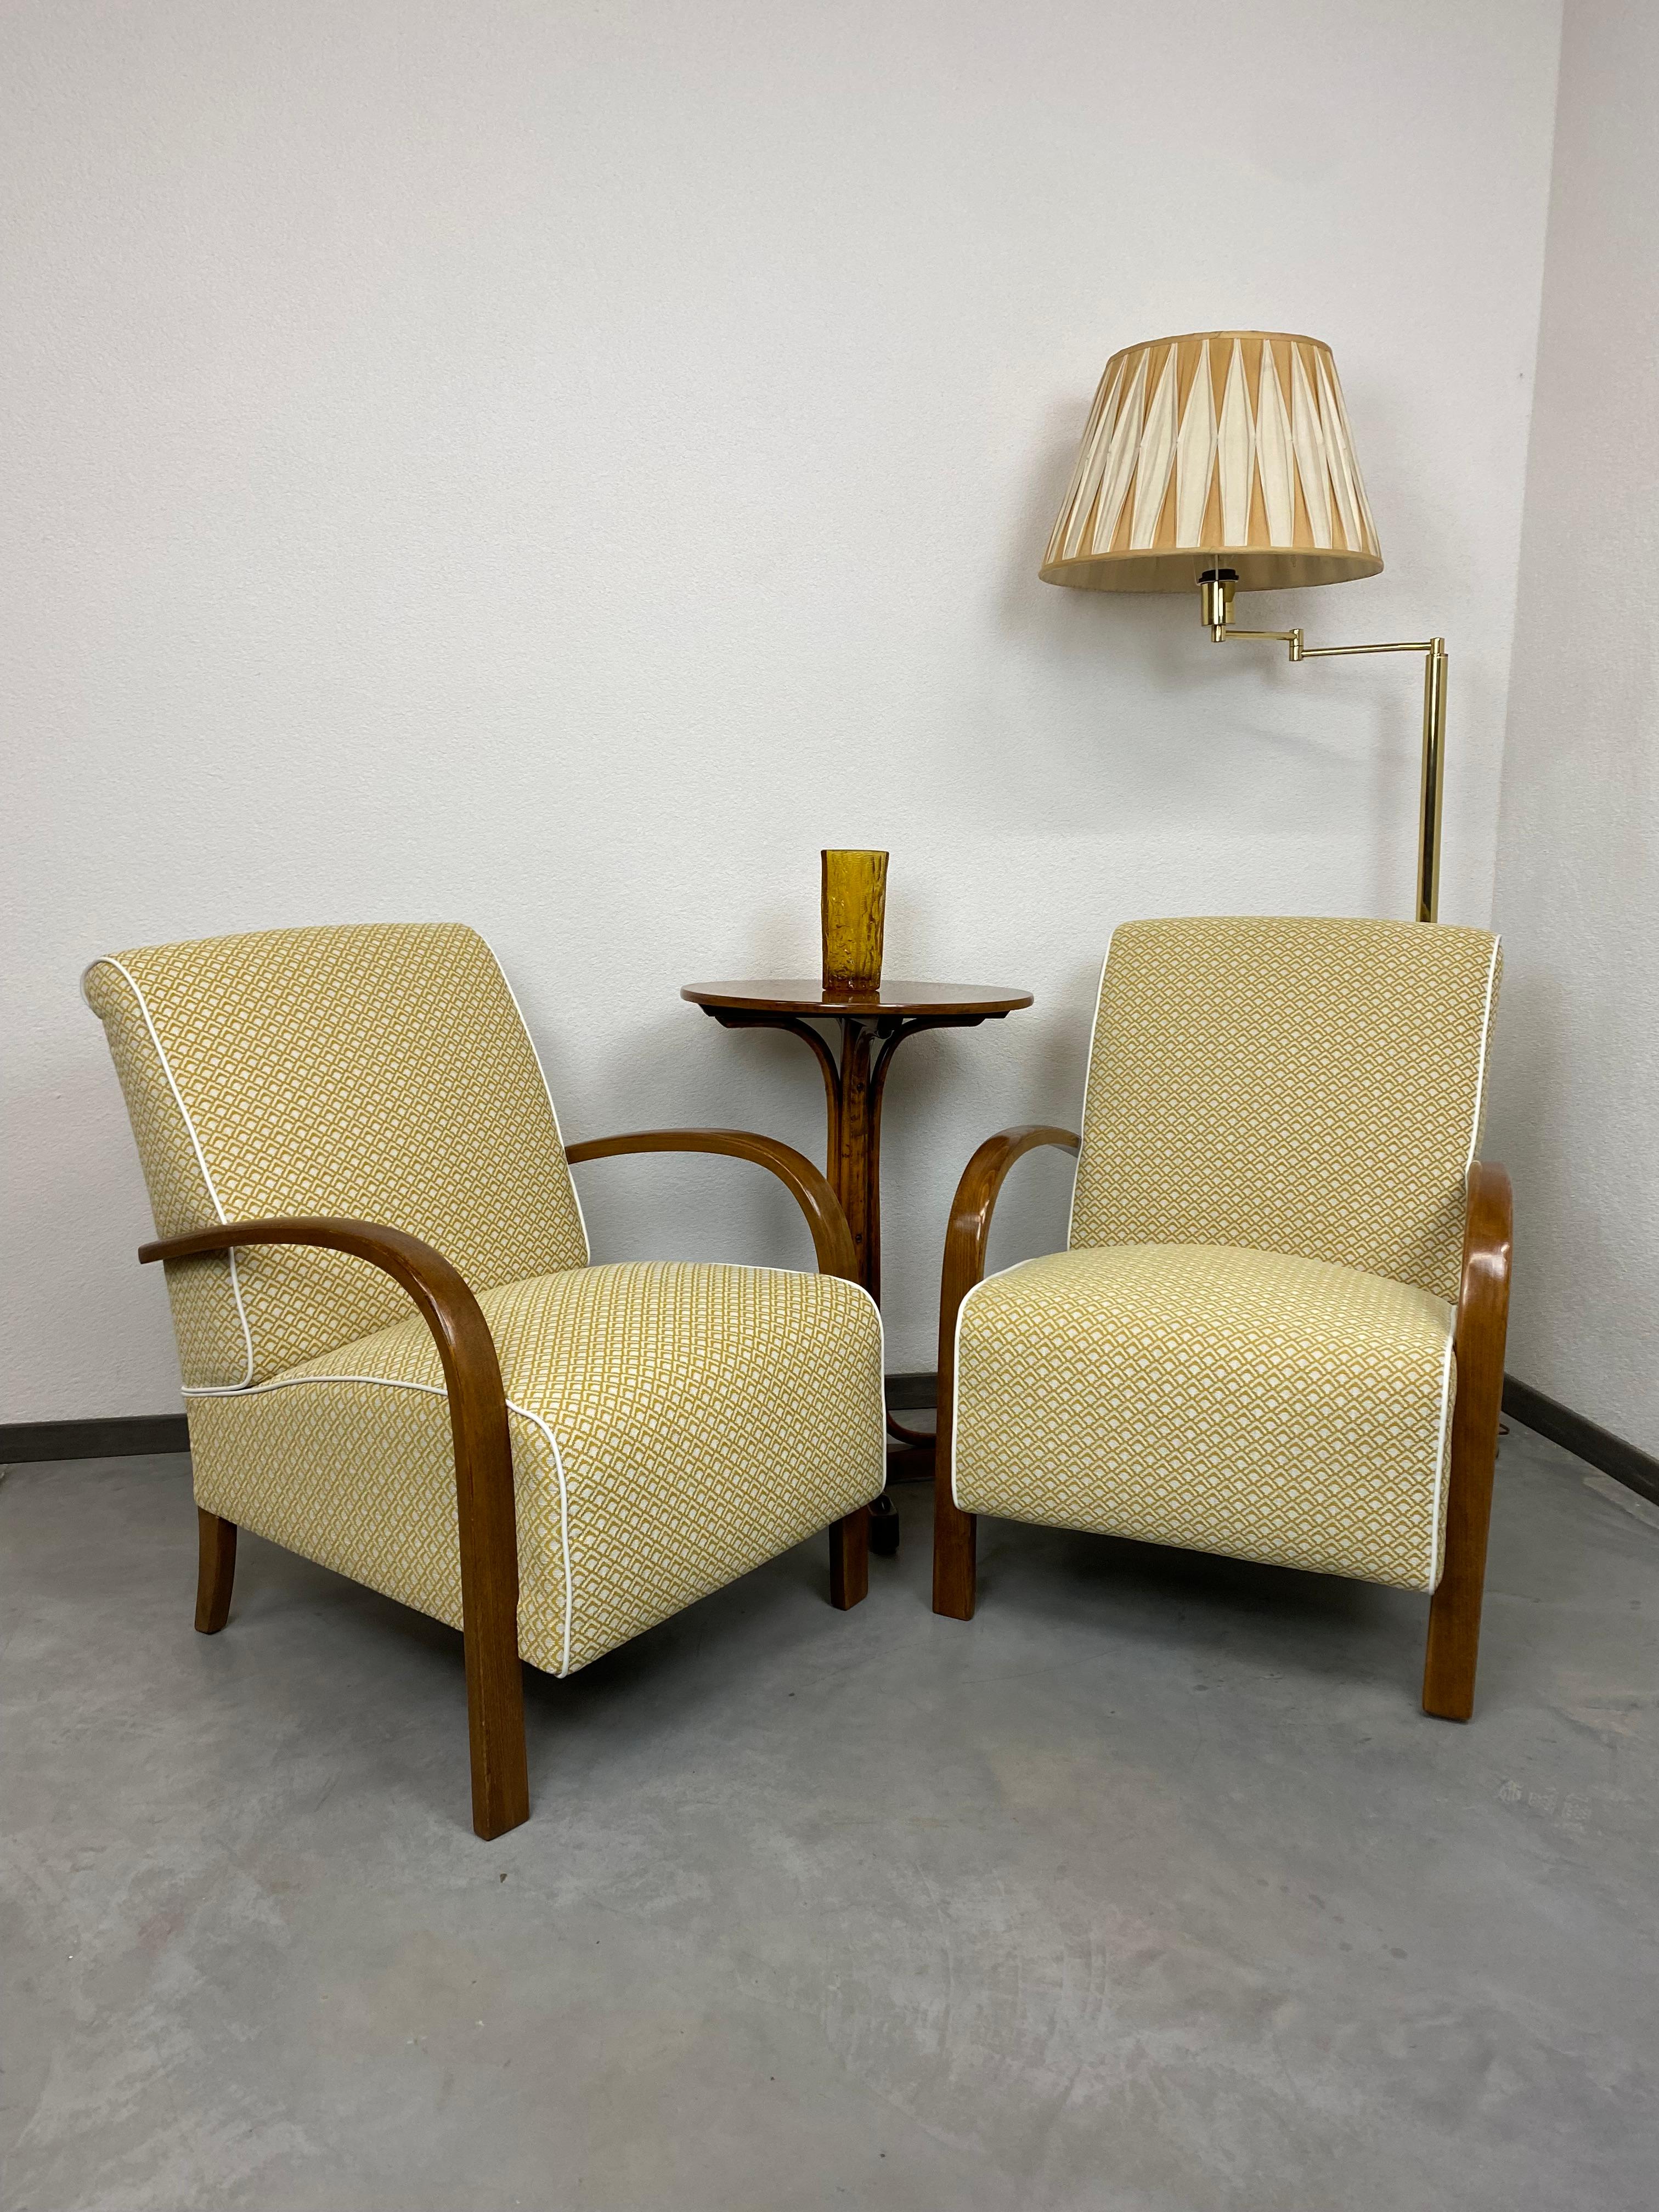 Art deco armchairs model H-213 by Jindrich Halabala professionally stained and repolished.